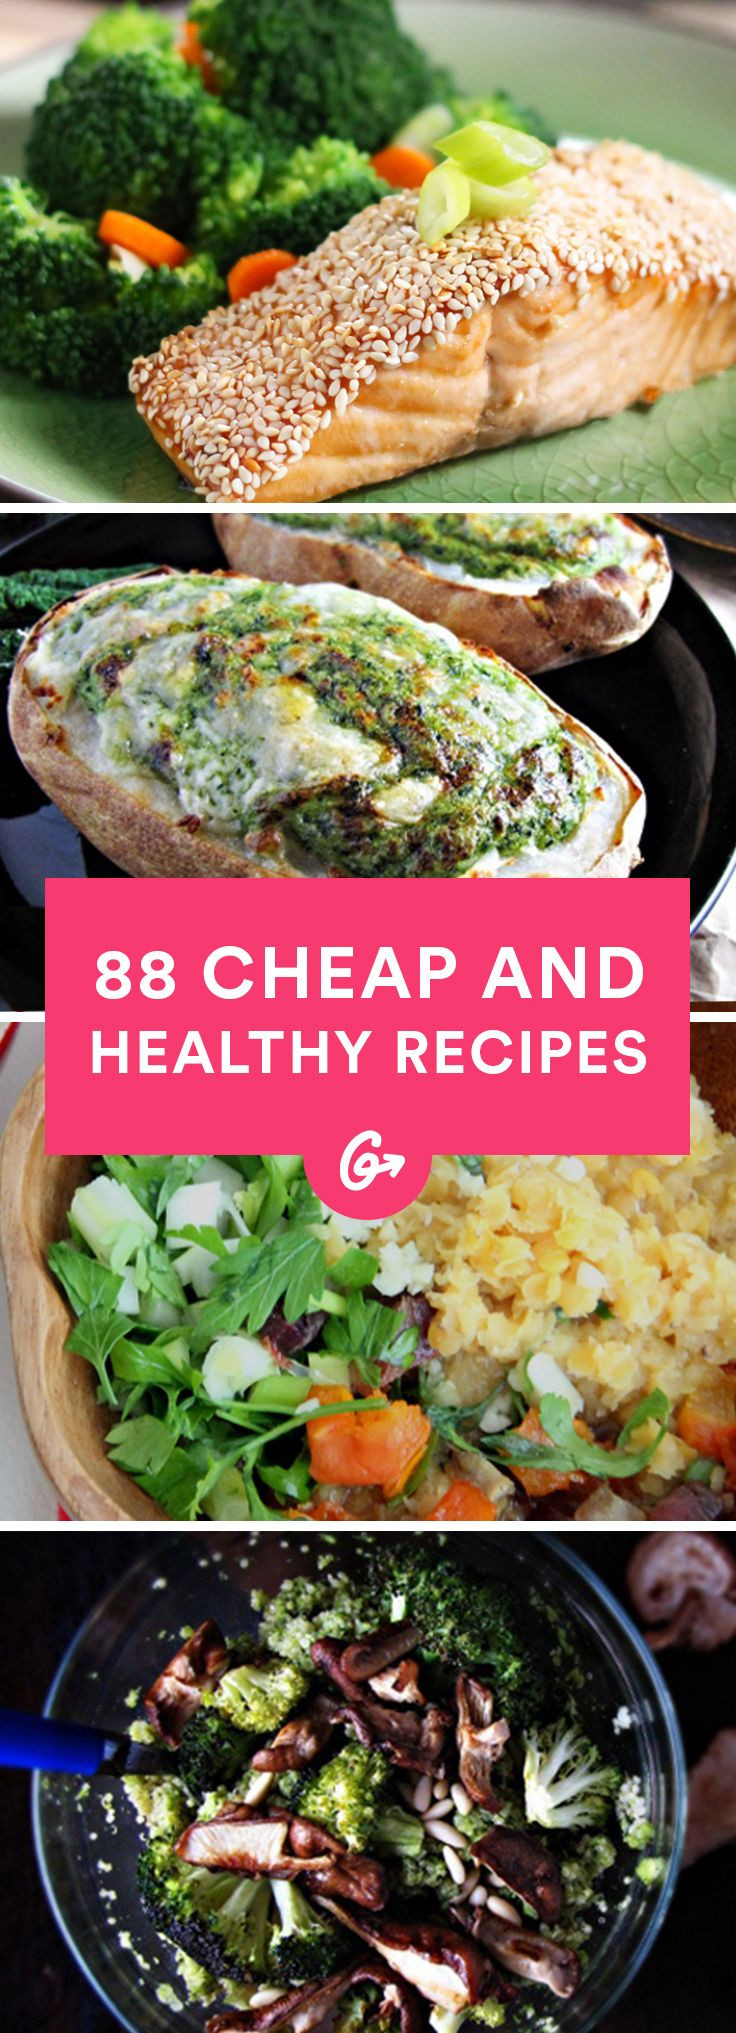 Cheap And Healthy Dinners
 The 25 best Entree recipes ideas on Pinterest